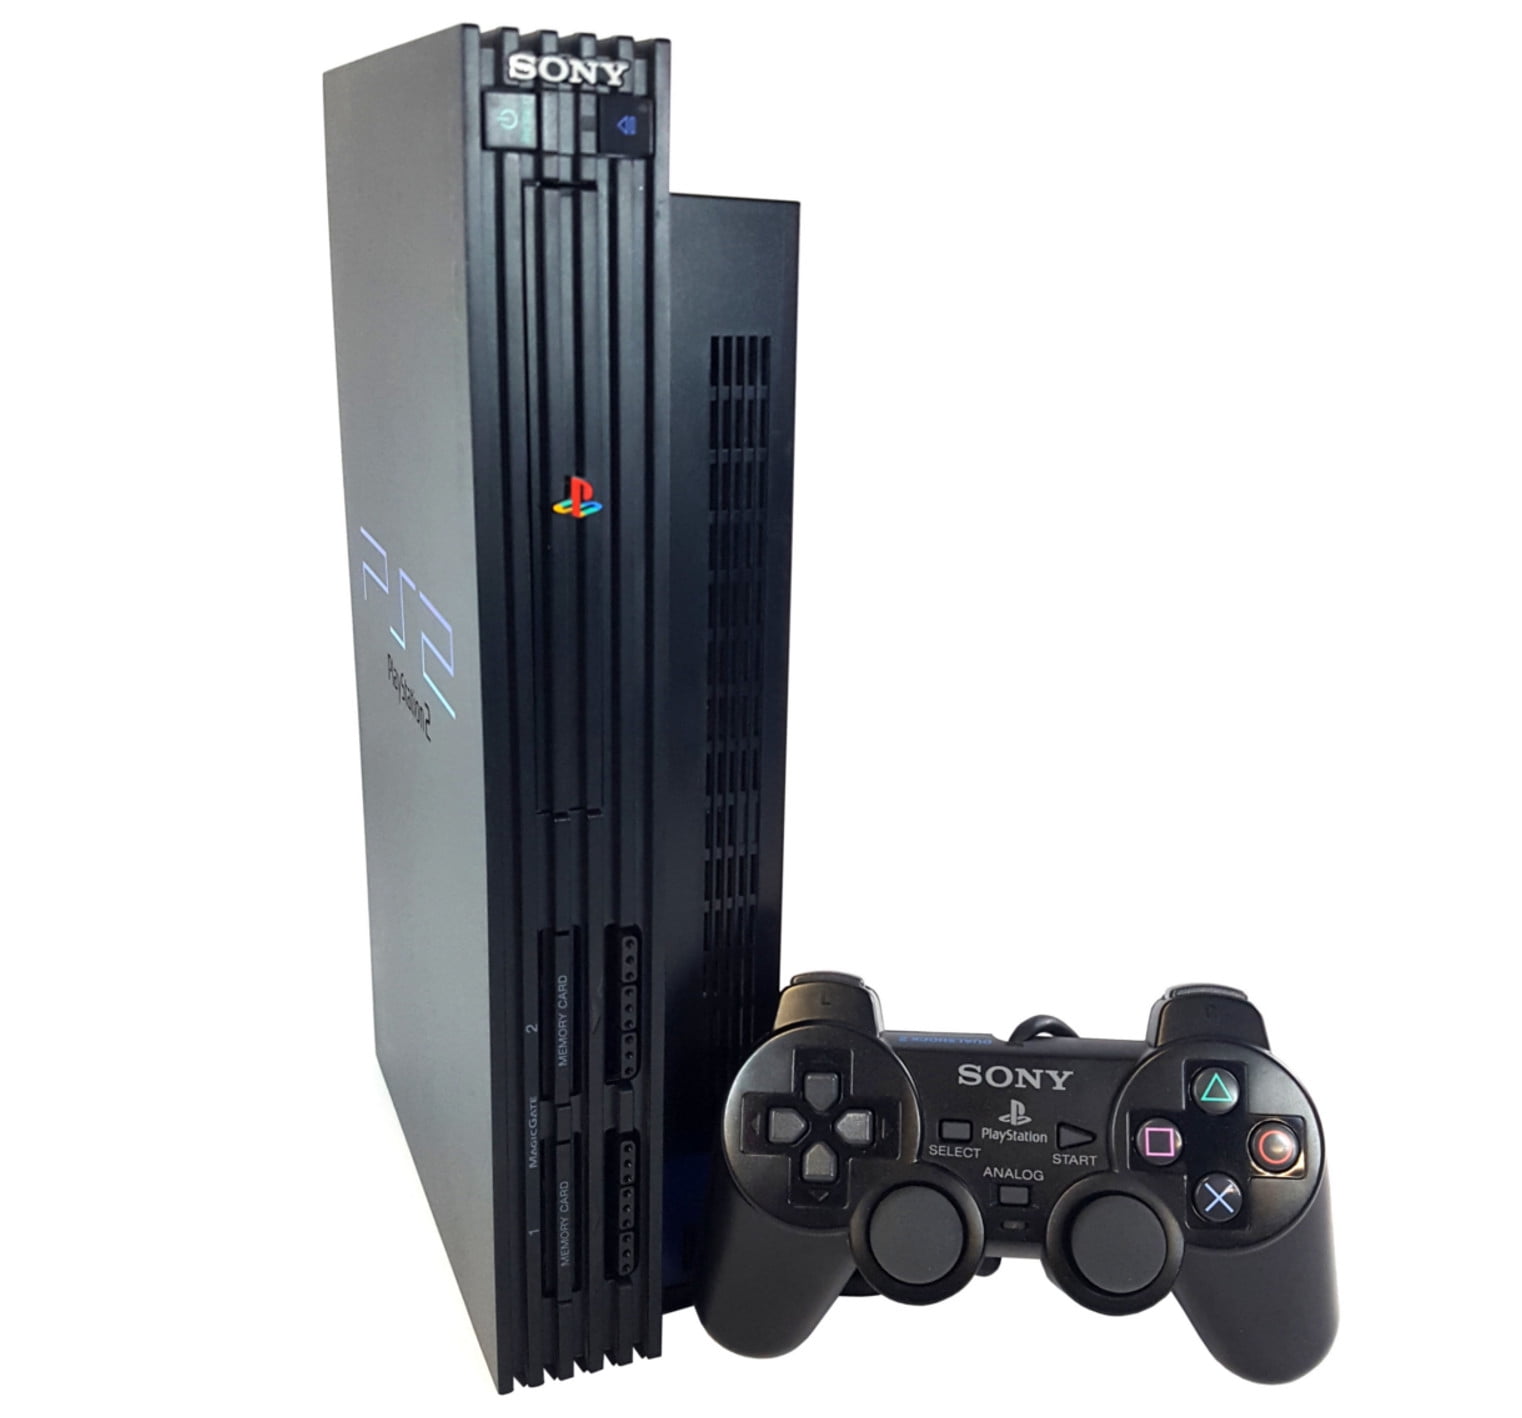 ps2 console buy